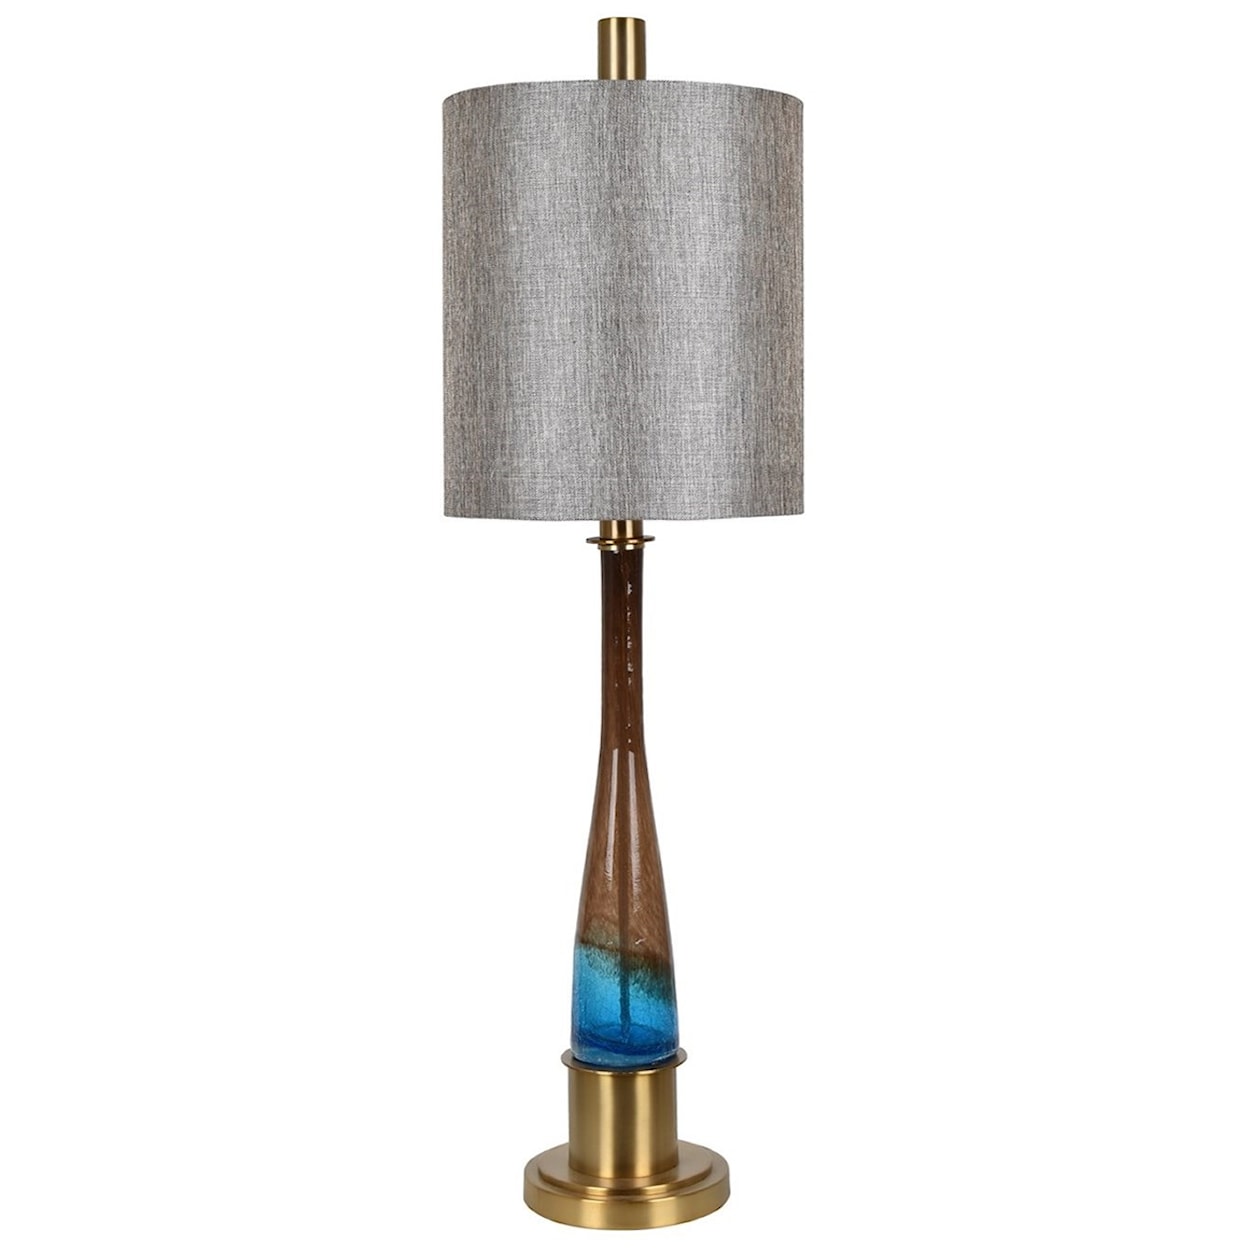 Crestview Collection Lighting Oliver Table Lamp